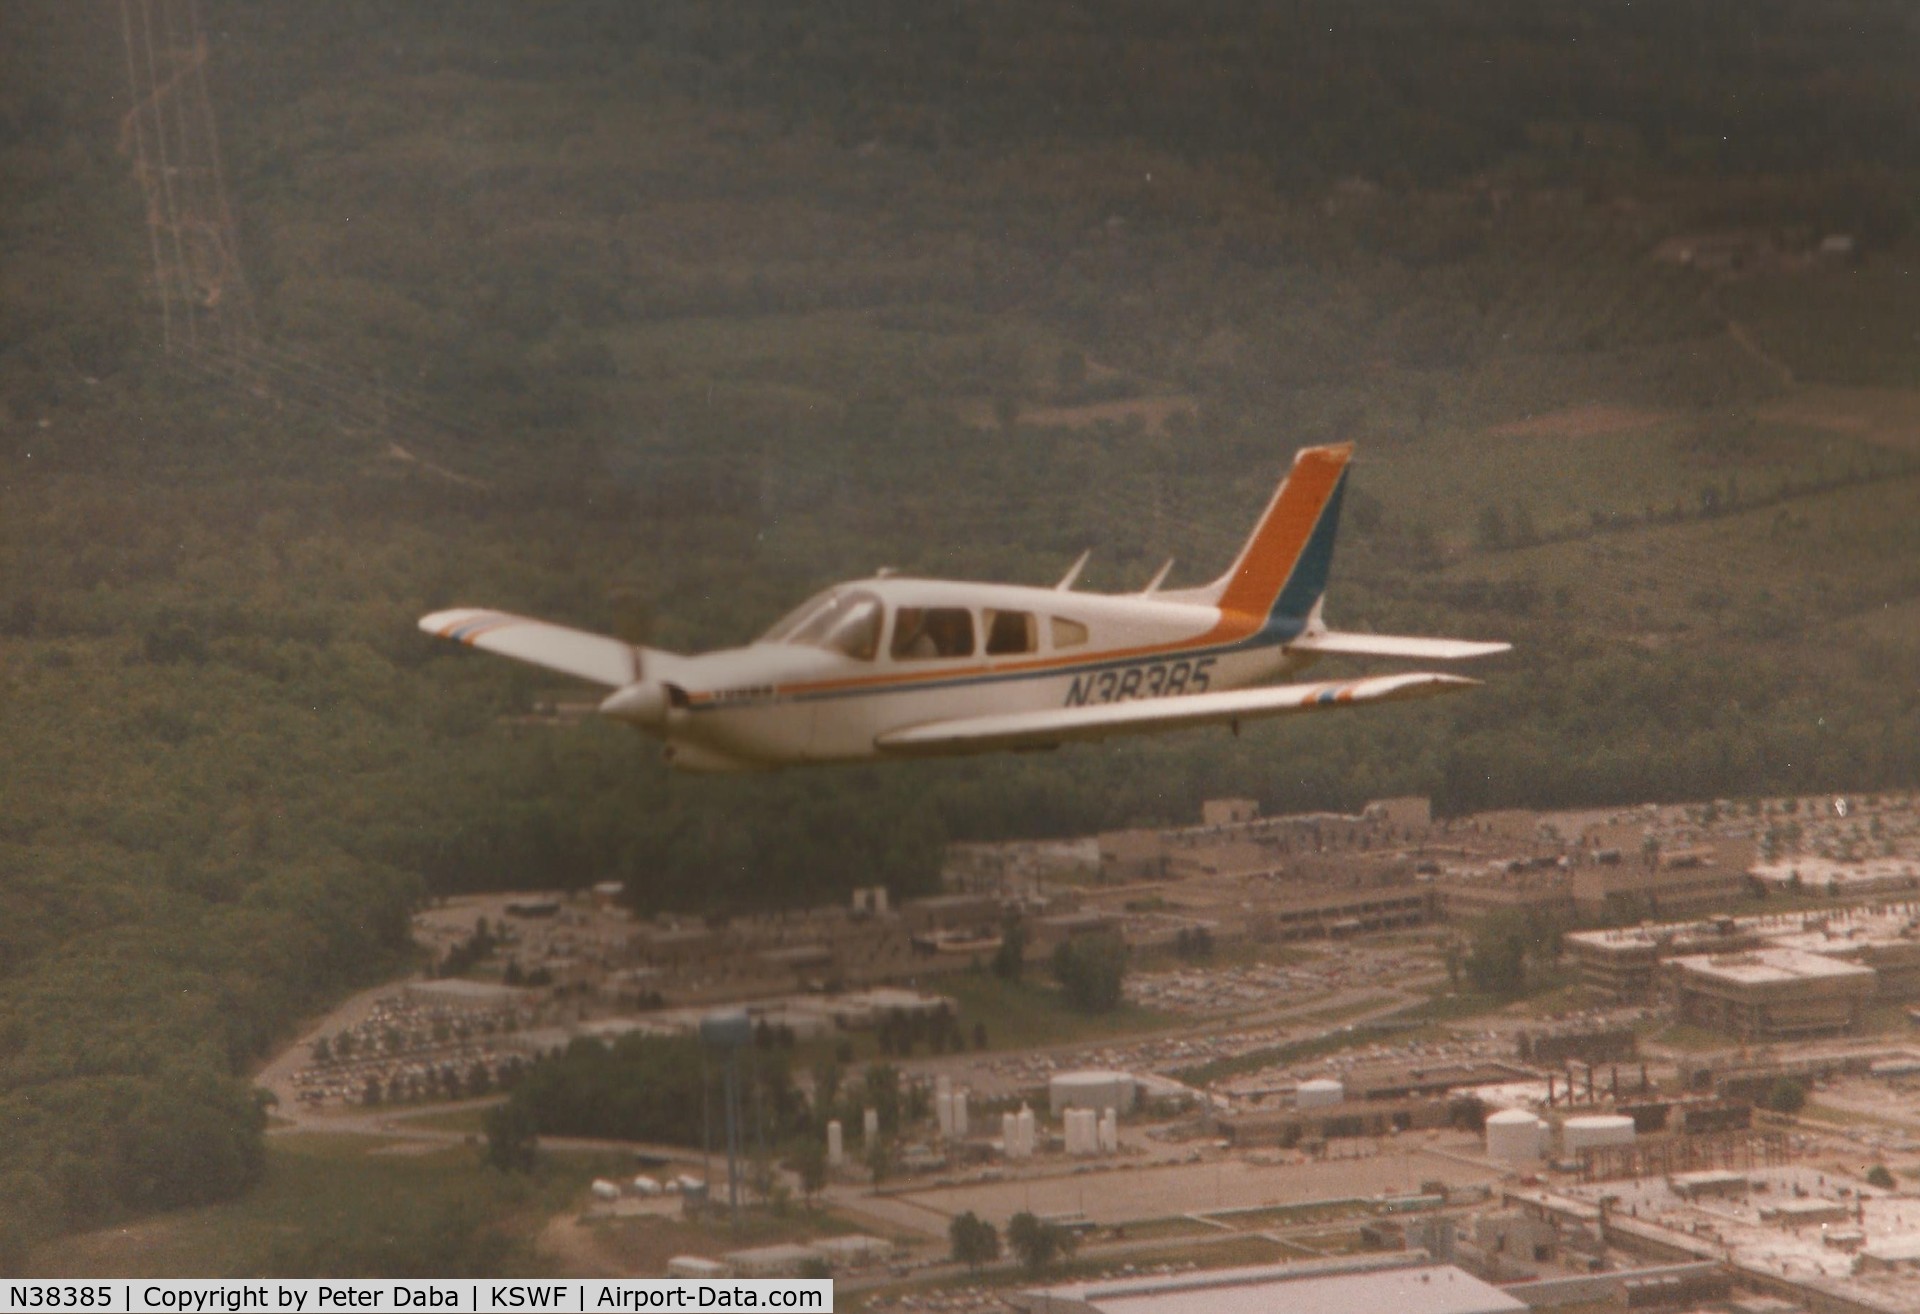 N38385, 1977 Piper PA-28R-201T Cherokee Arrow III C/N 28R-7703211, air to air photo of my pa-28r-201t arrow
which I owned in the early 80's